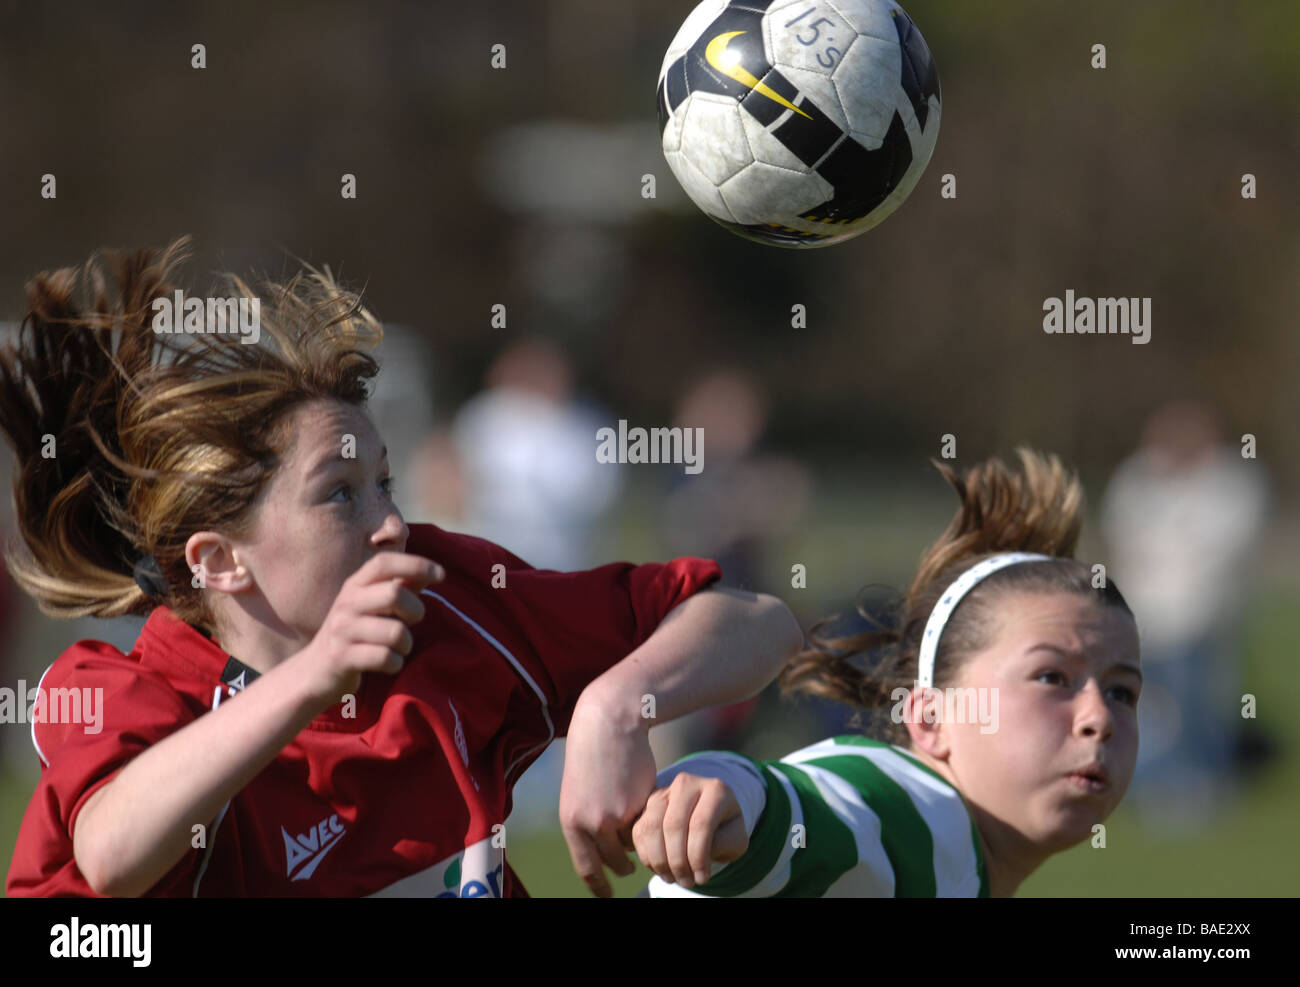 Football young girls female soccer action sport contest match football match tackle tackling shooting Stock Photo